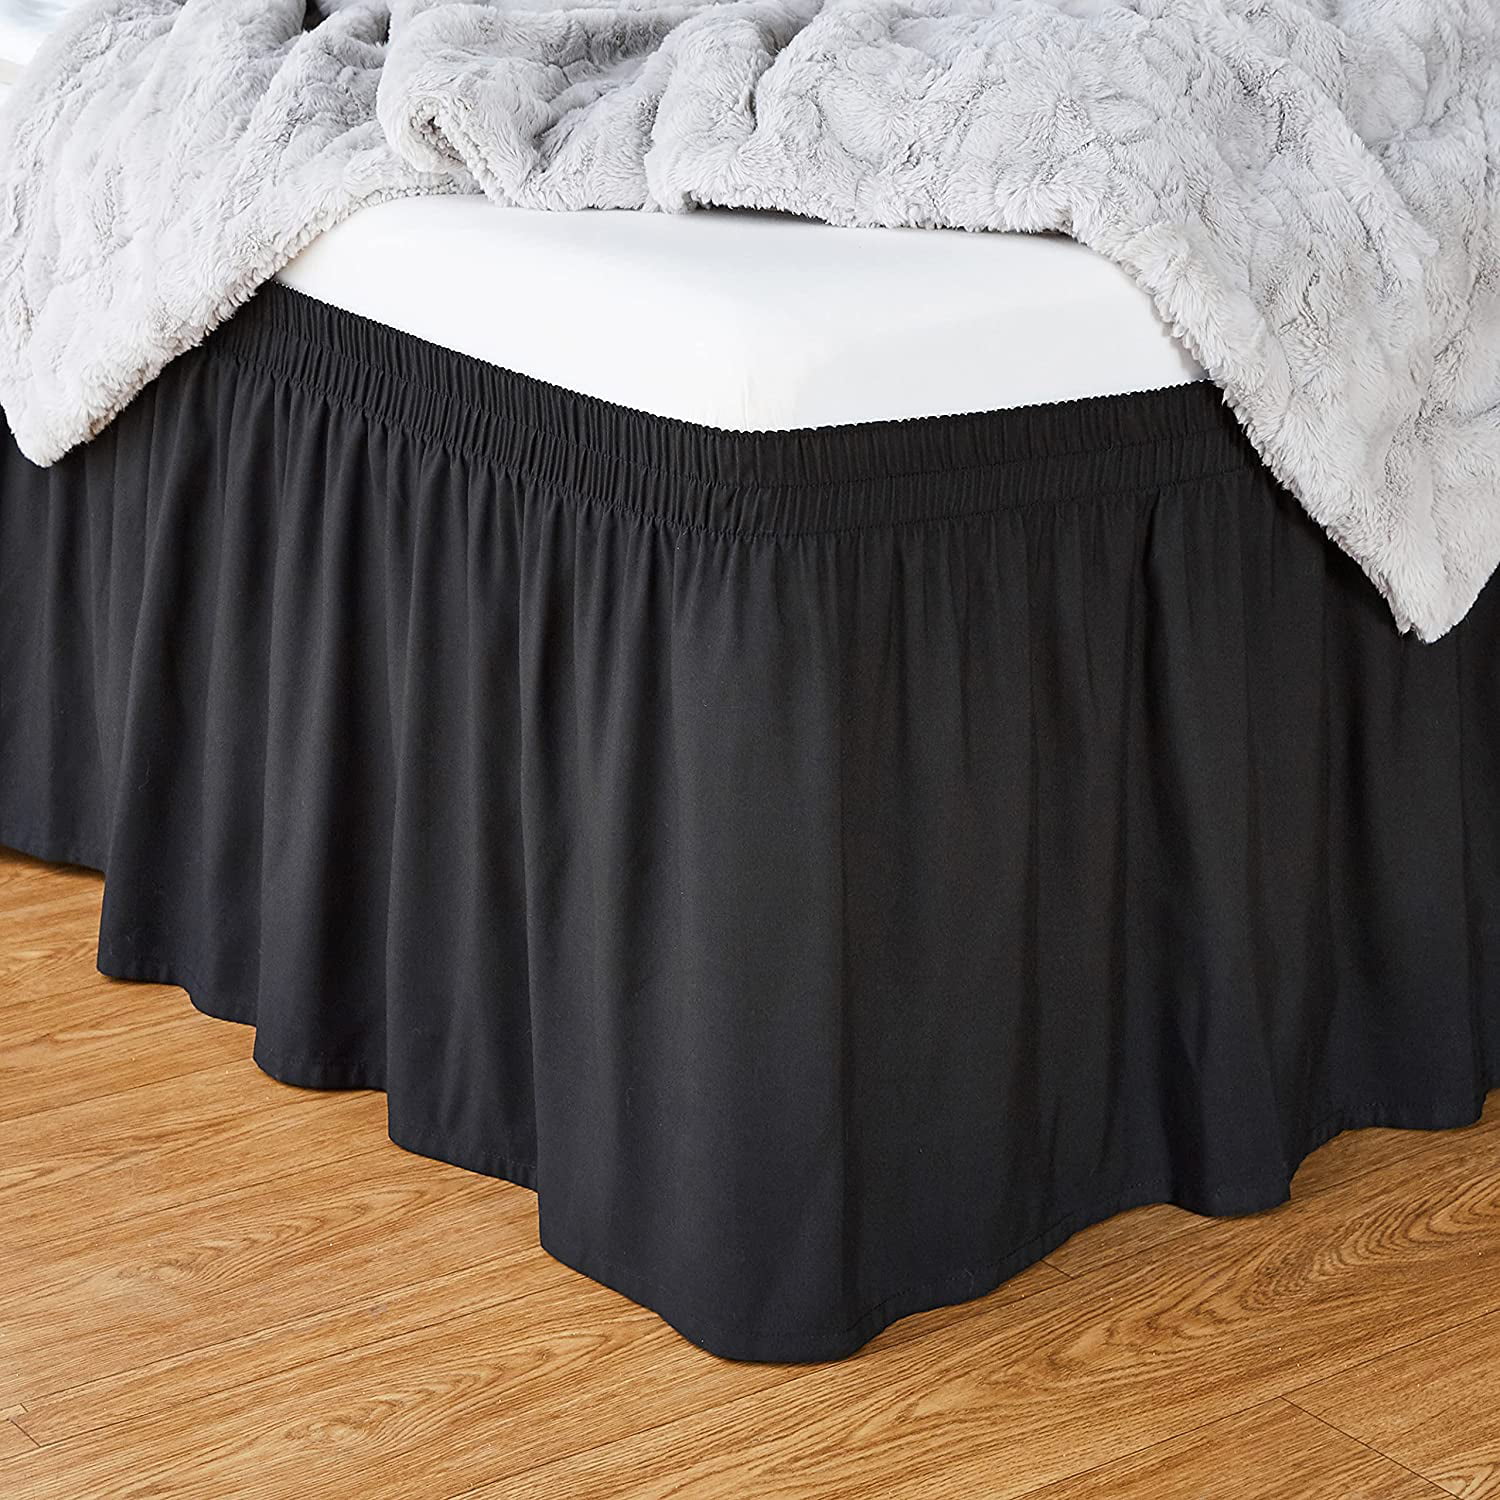 Details about   Microfiber Bed Dust Ruffle Skirt Elastic Band Wrap Around Bedskirt Decor Queen K 